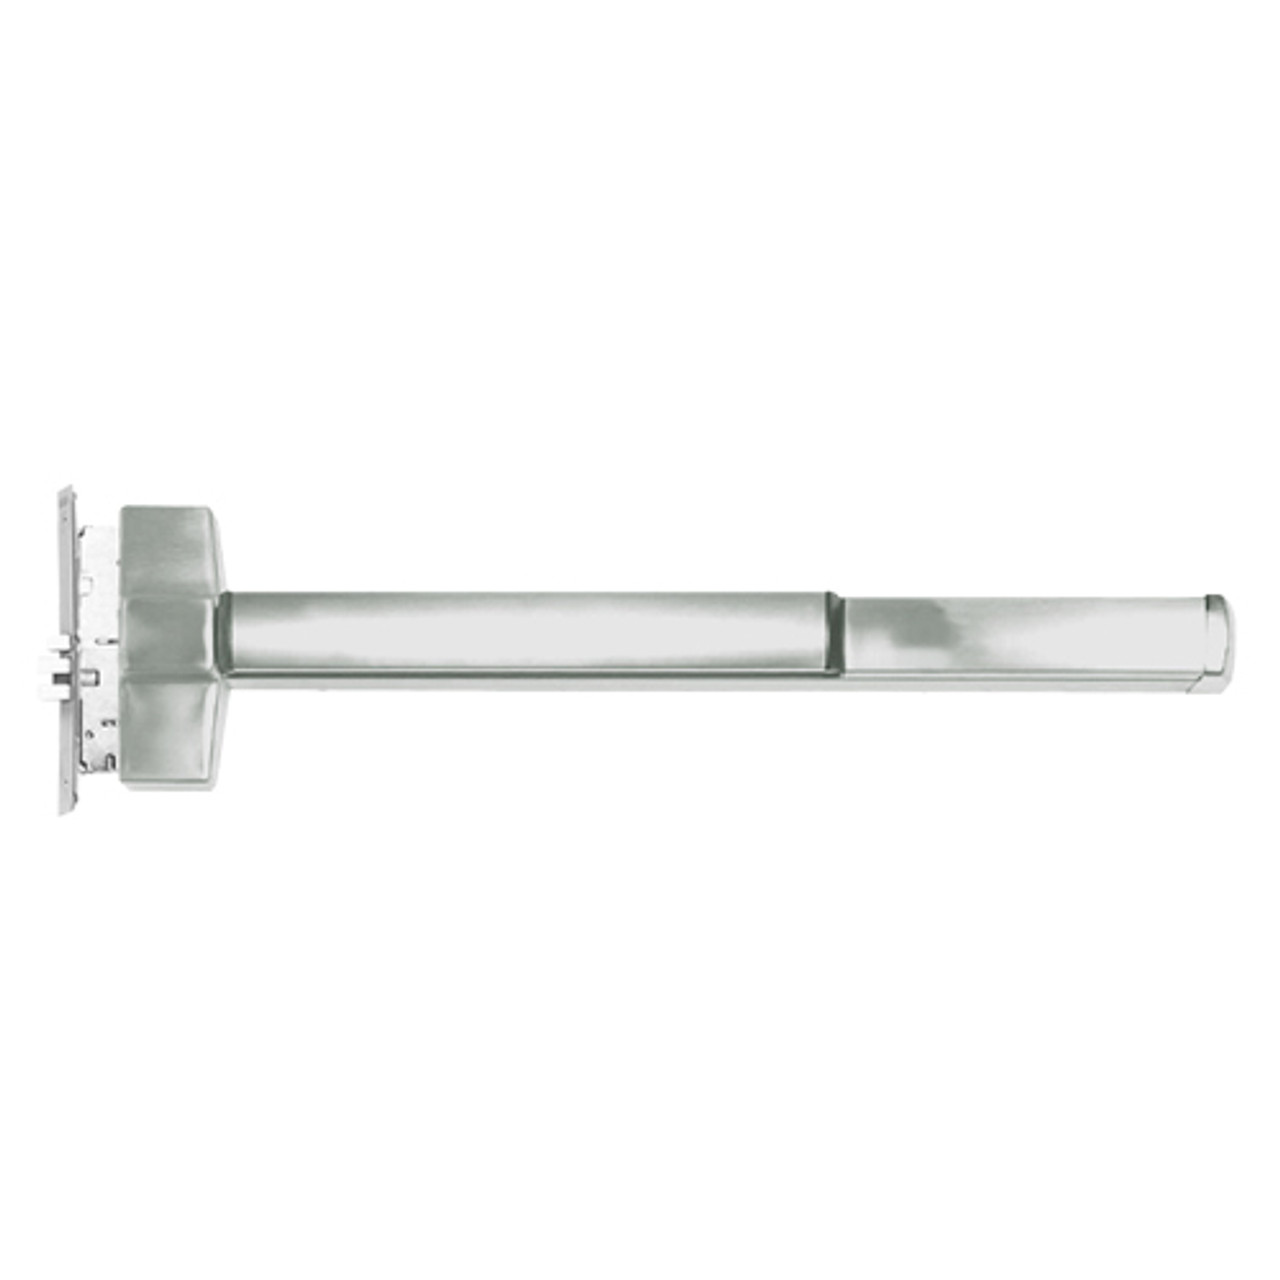 ED5600AT-619-LHR Corbin ED5600 Series Fire Rated Mortise Exit Device in Satin Nickel Finish